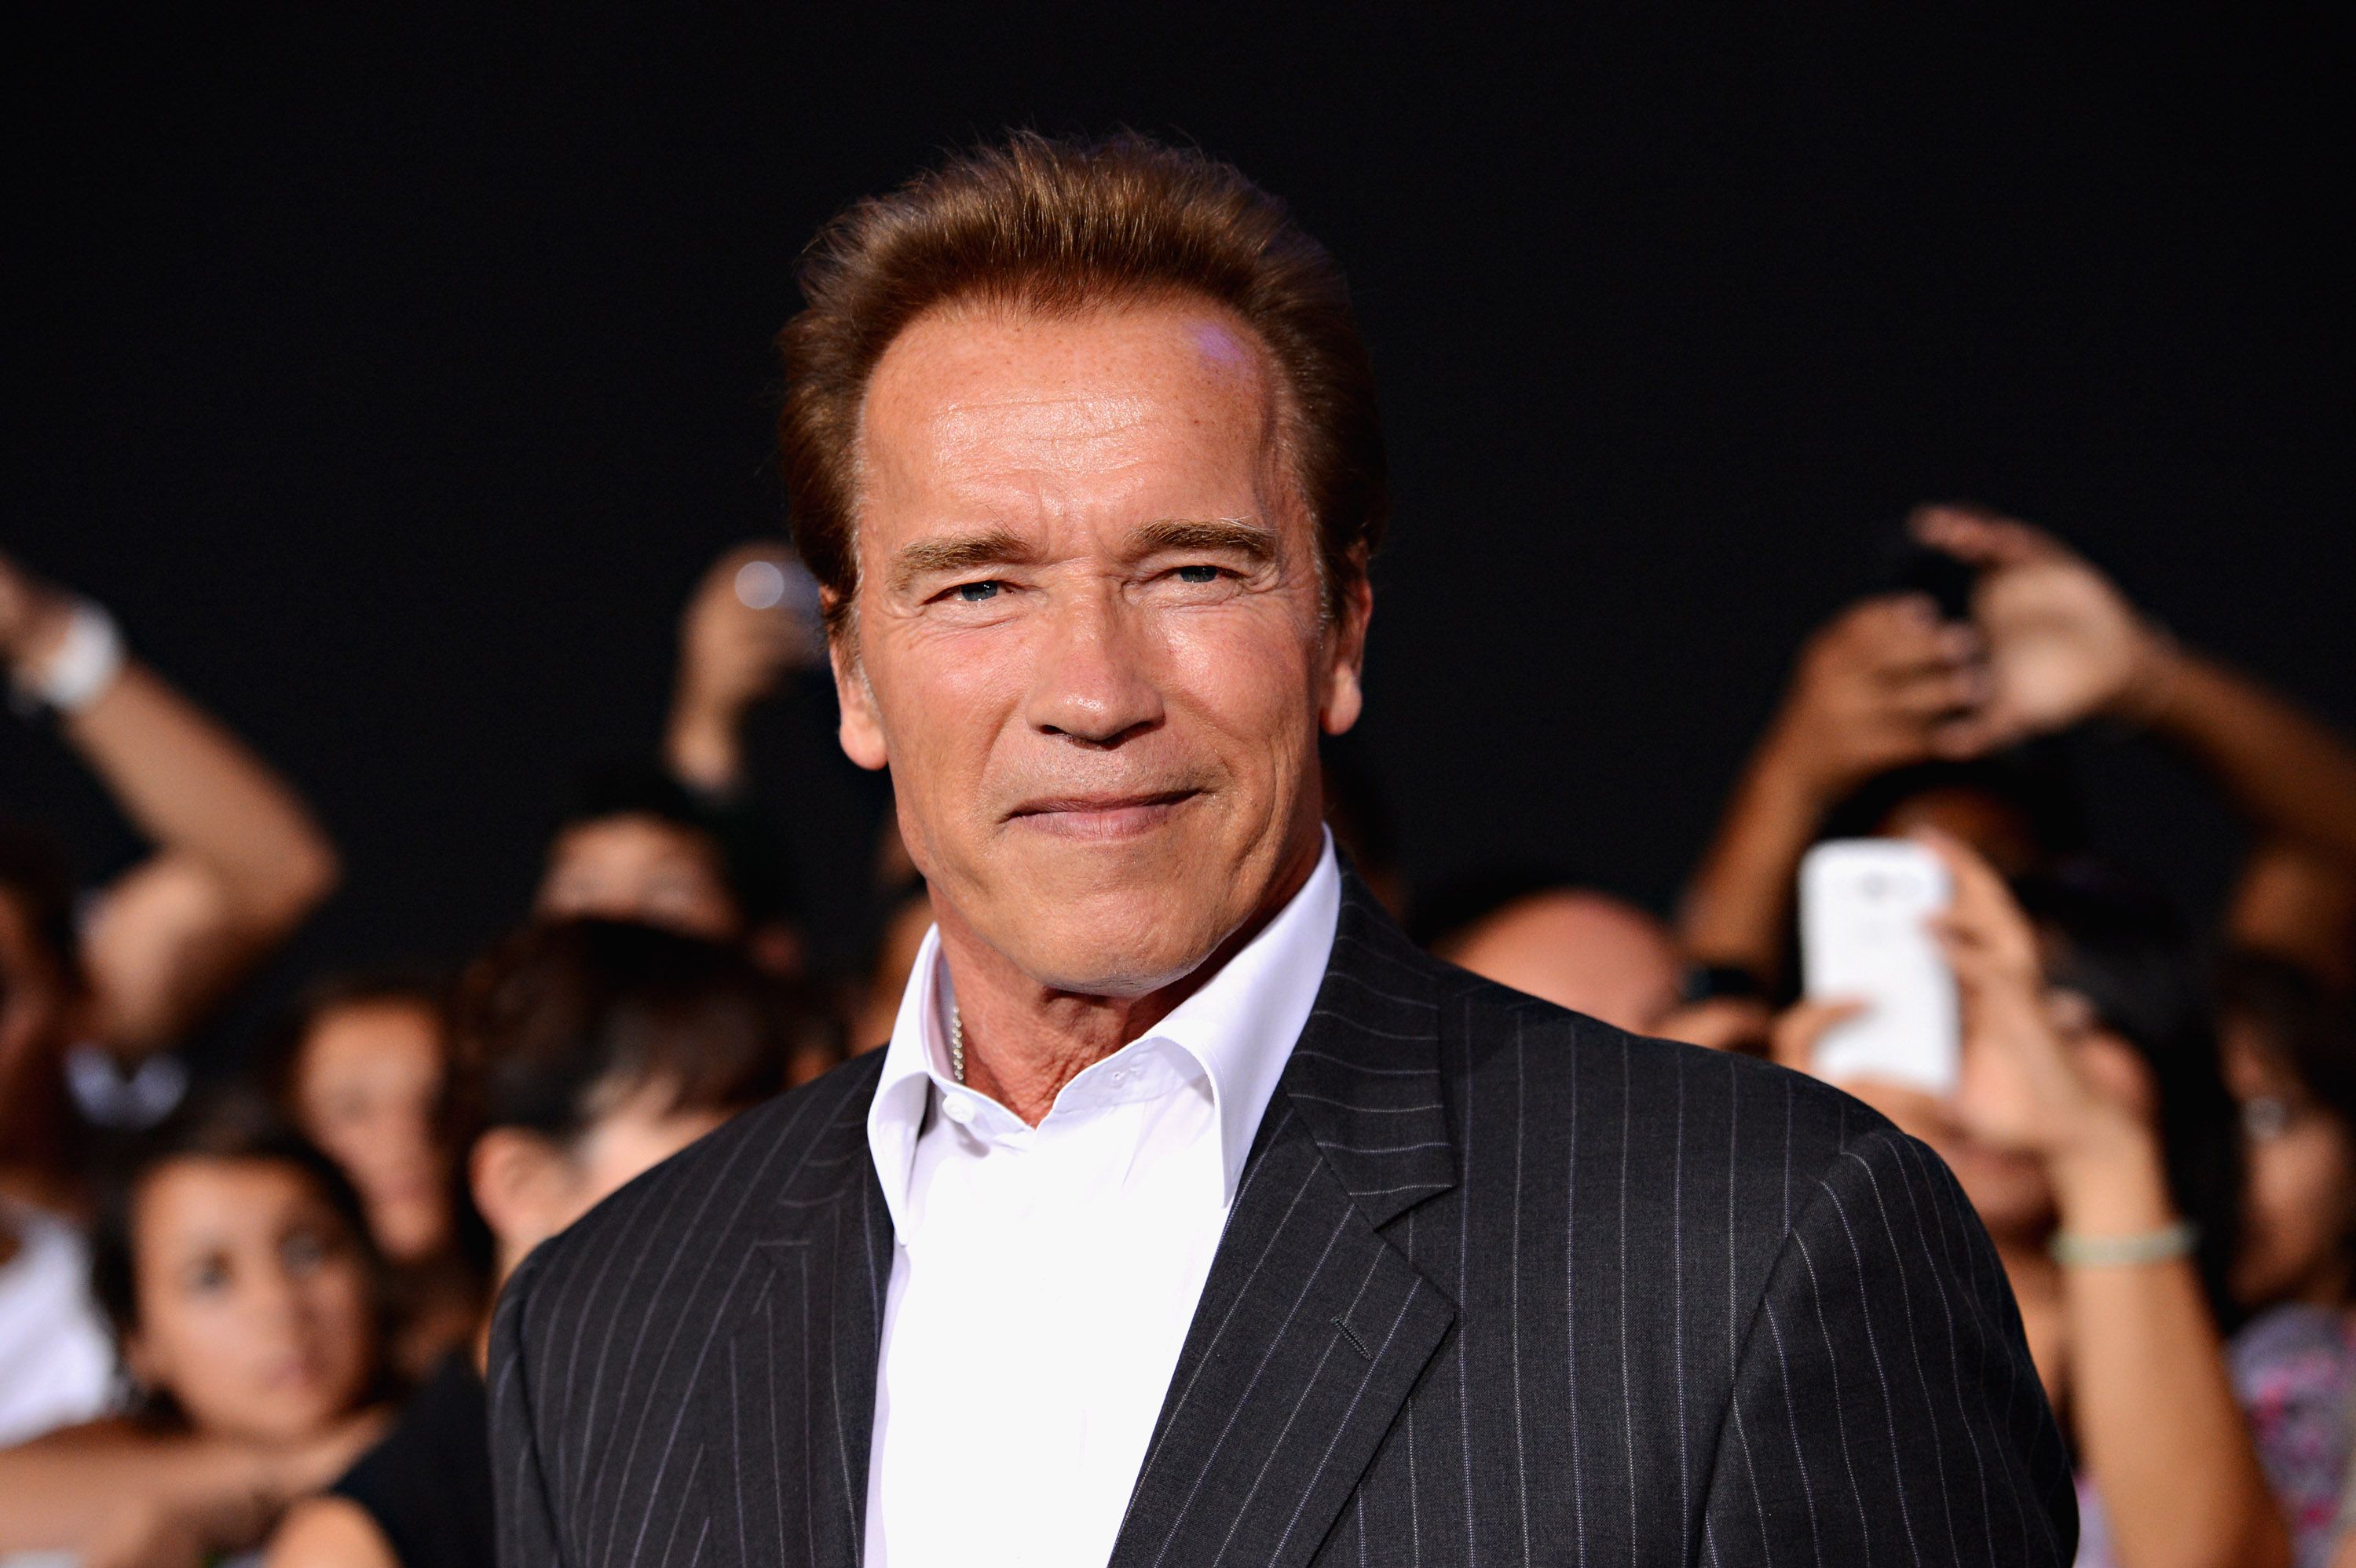 Arnold Schwarzenegger at Lionsgate Films' "The Expendables 2" premiere on August 15, 2012 in Hollywood, California | Photo: Getty Images